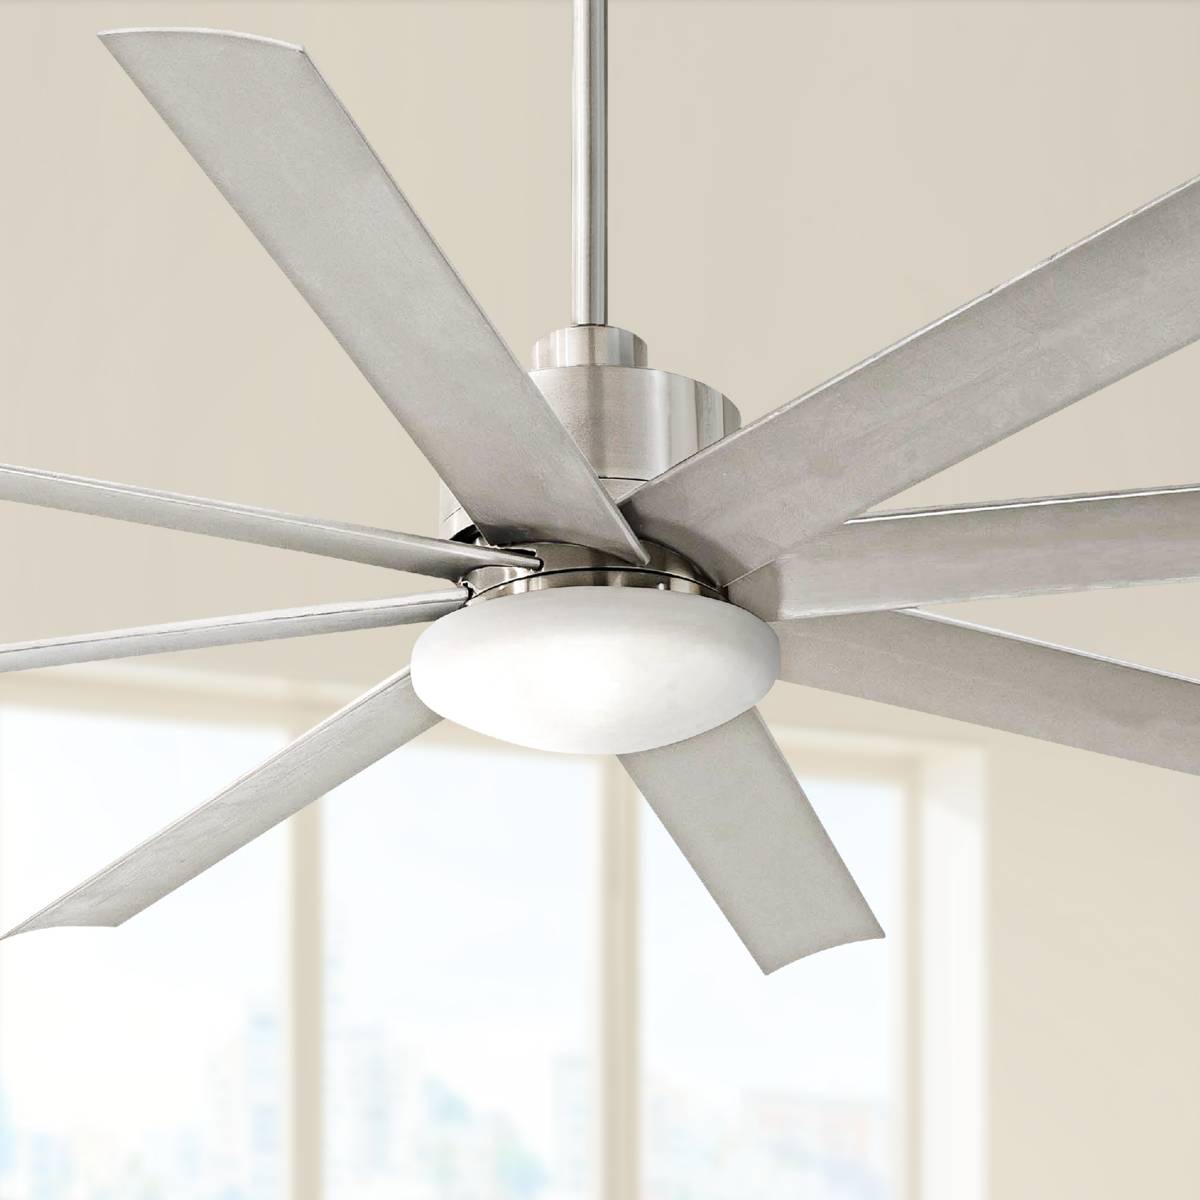 Silver, Ceiling Fan With Light Kit, Ceiling Fans - Page 2 | Lamps Plus